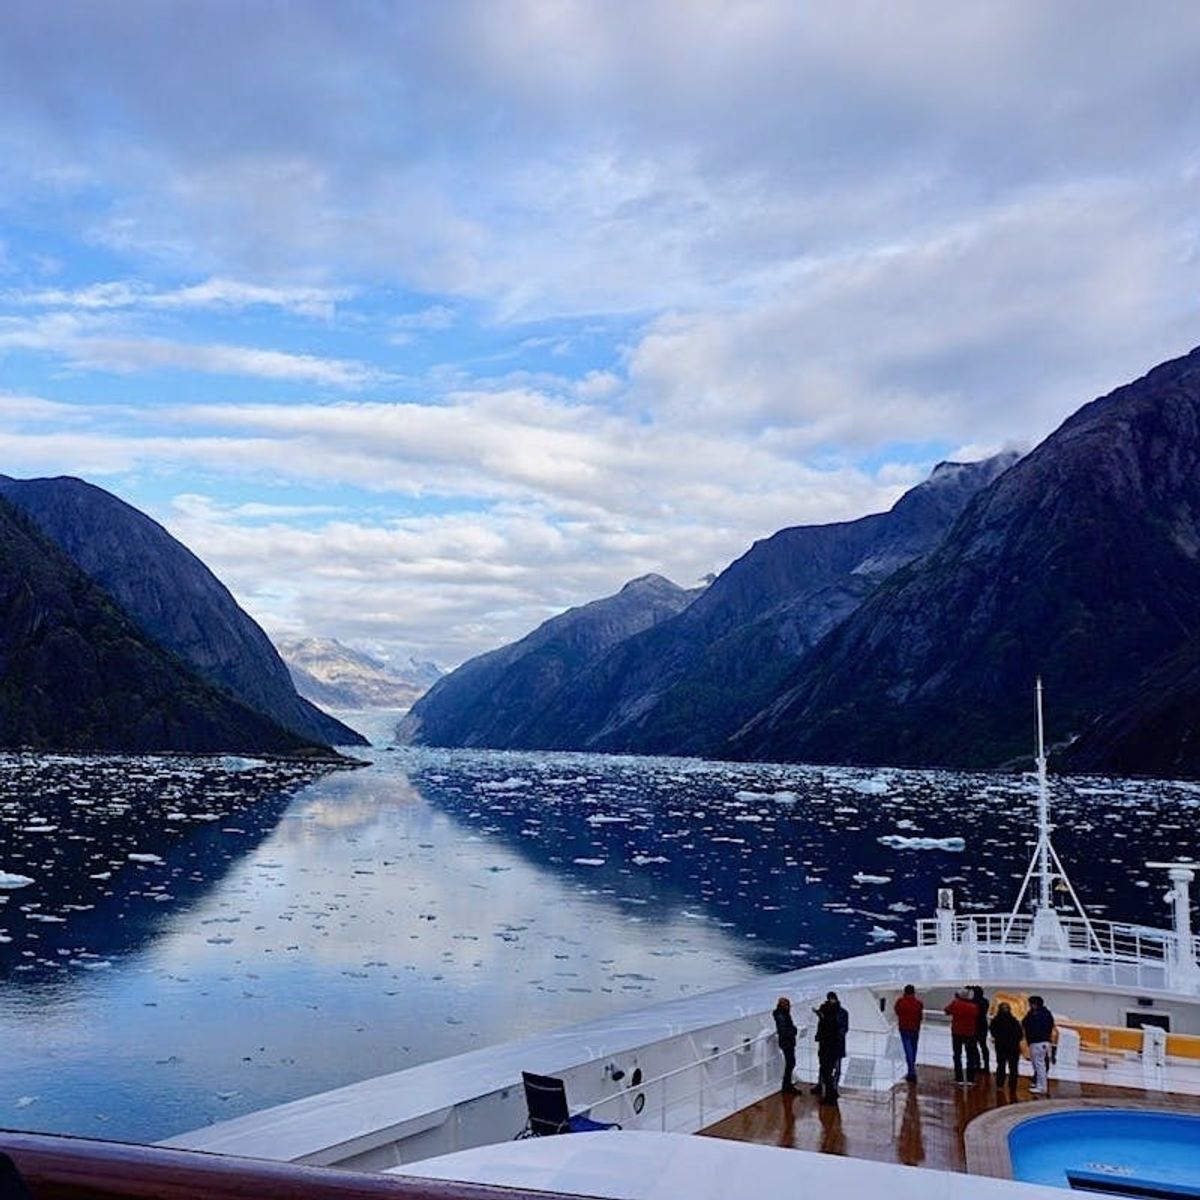 Why This Disney Cruise to Alaska Is an Adventure of a Lifetime